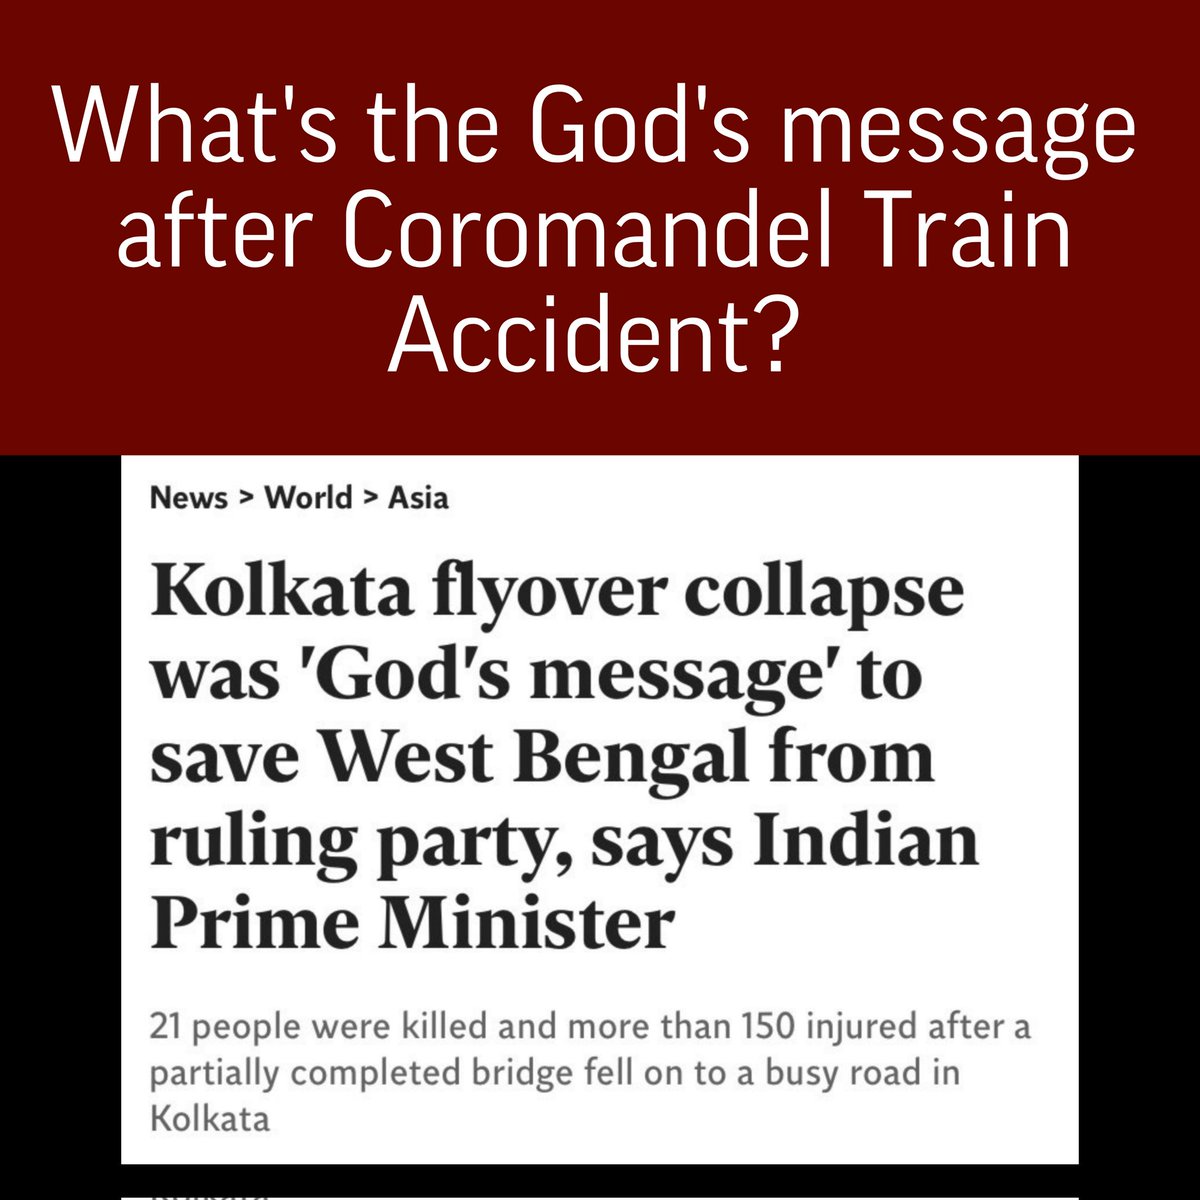 What's the God's message now Mr. Modi?
#TrainAccident